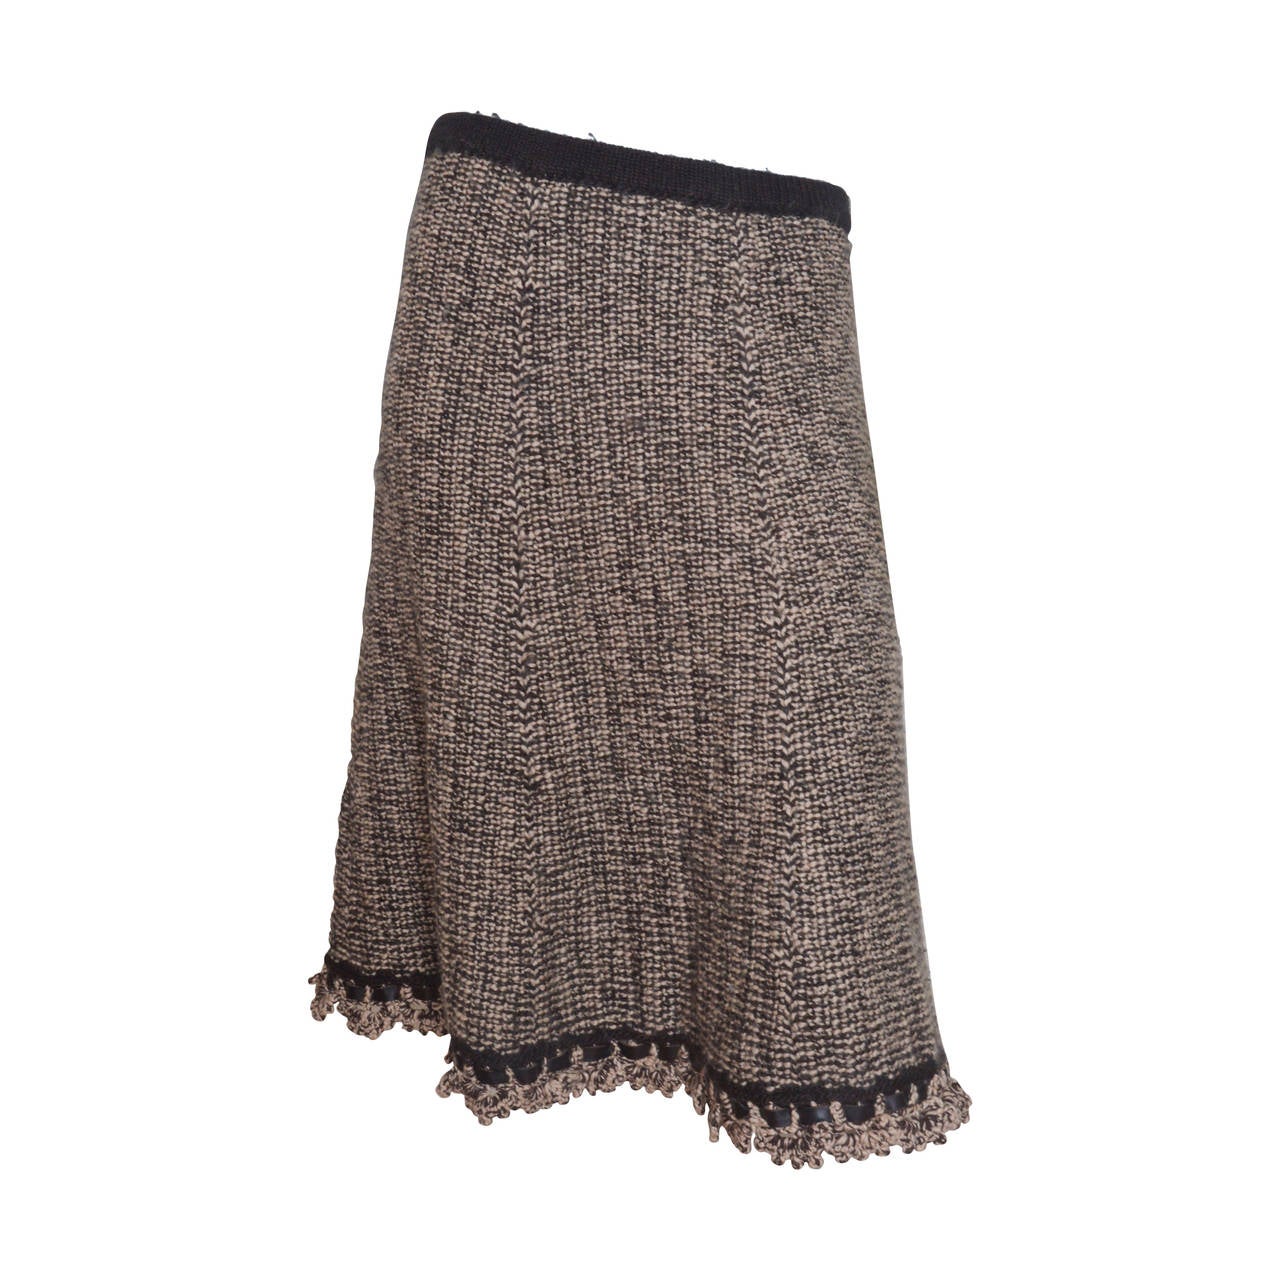 Chanel Woven Knit Skirt with Crochet Trim